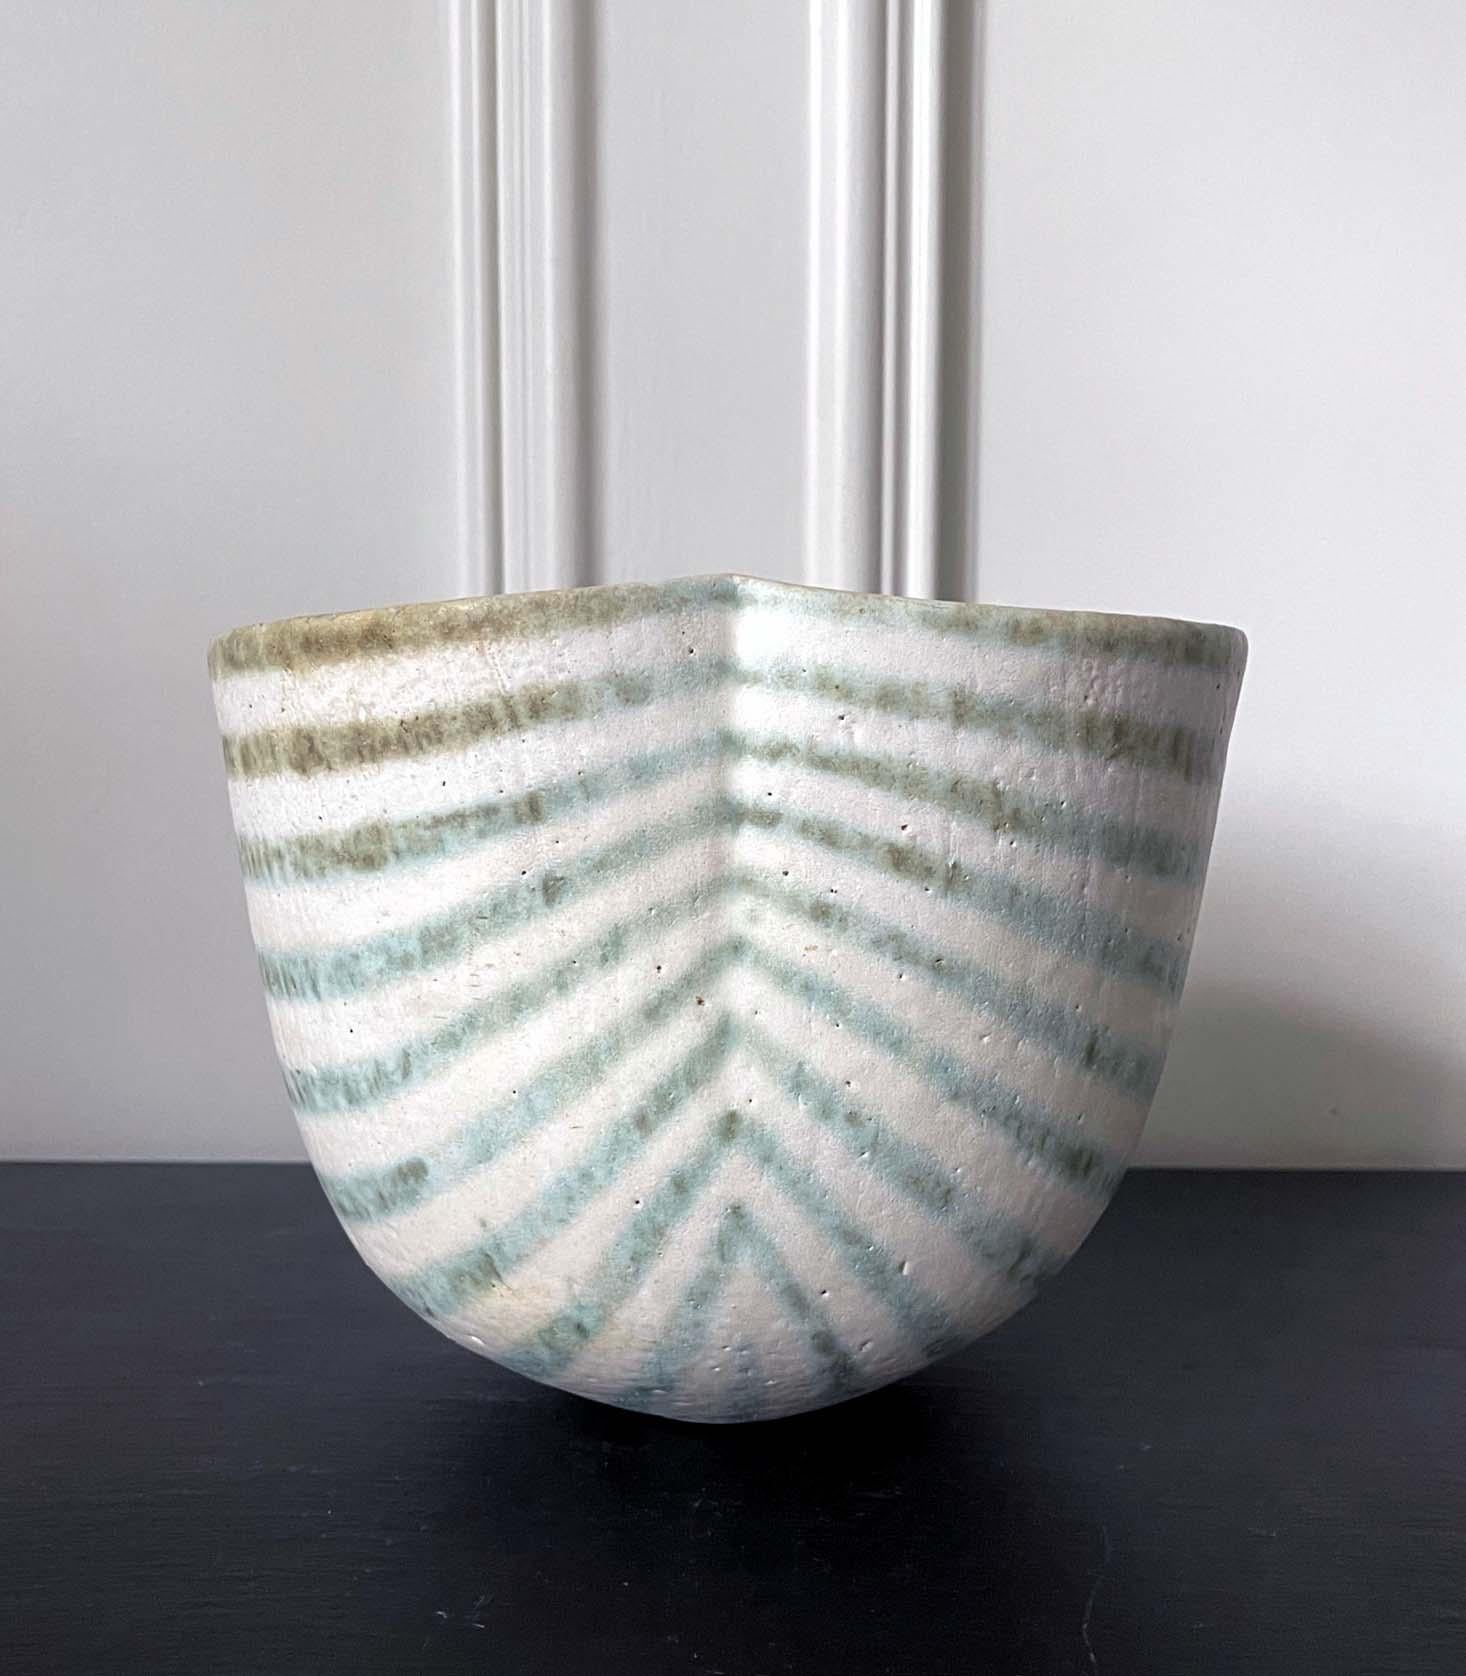 A stoneware vessel with glazed and banded stripes design by British studio ceramist John Ward (1938-2023) circa 1986. The vessel takes its simple but distinct form between a deep bowl and a vase, with its organic folding and gentle curve. It was